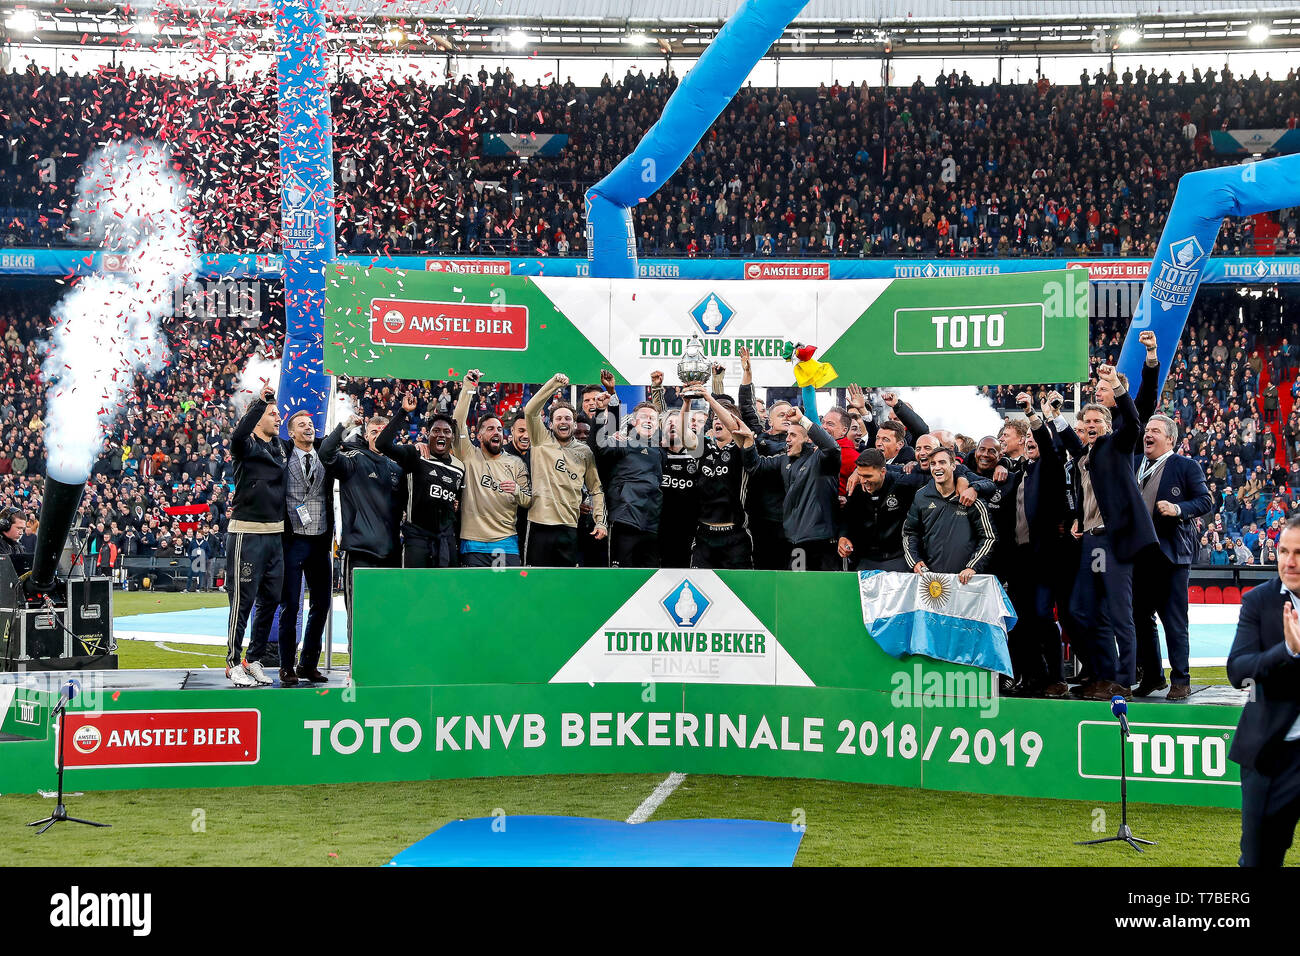 Rotterdam, Netherlands. 05th 2019. ROTTERDAM, 05-05-2019 Stadium de Kuip, Season 2018/2019 Cup Final for the KNVB beker. Ajax lifting the after the game II - Ajax (Cup Final) (